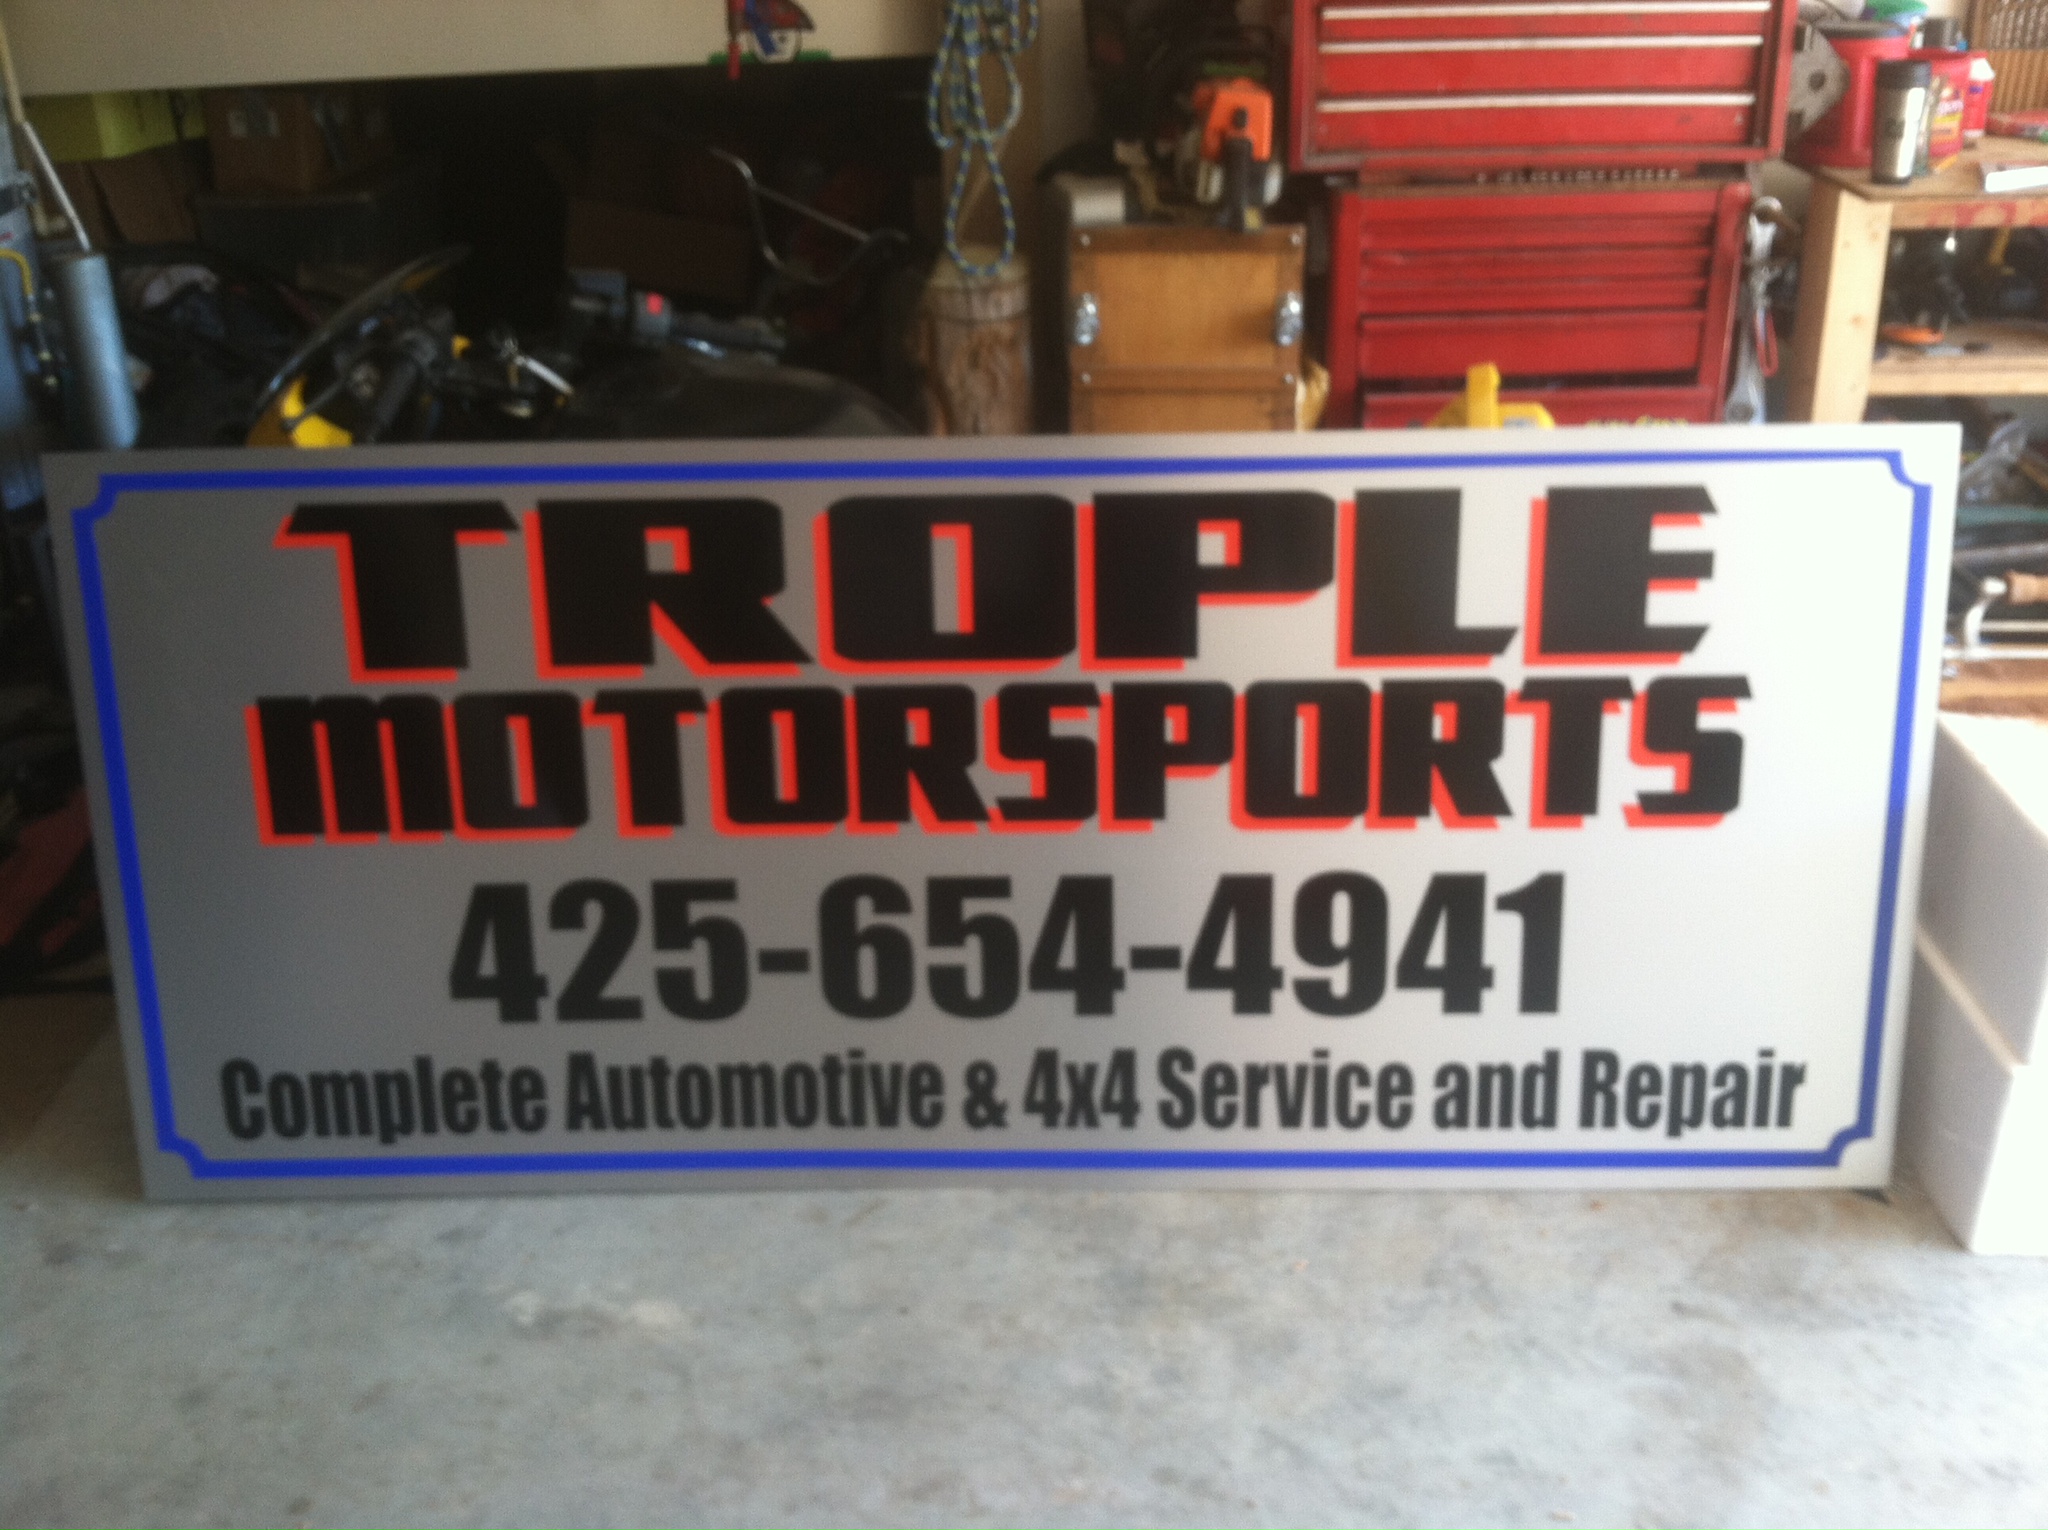 die-cut graphics on brushed metal alupanel for Trople Motorsports of Everett, wa